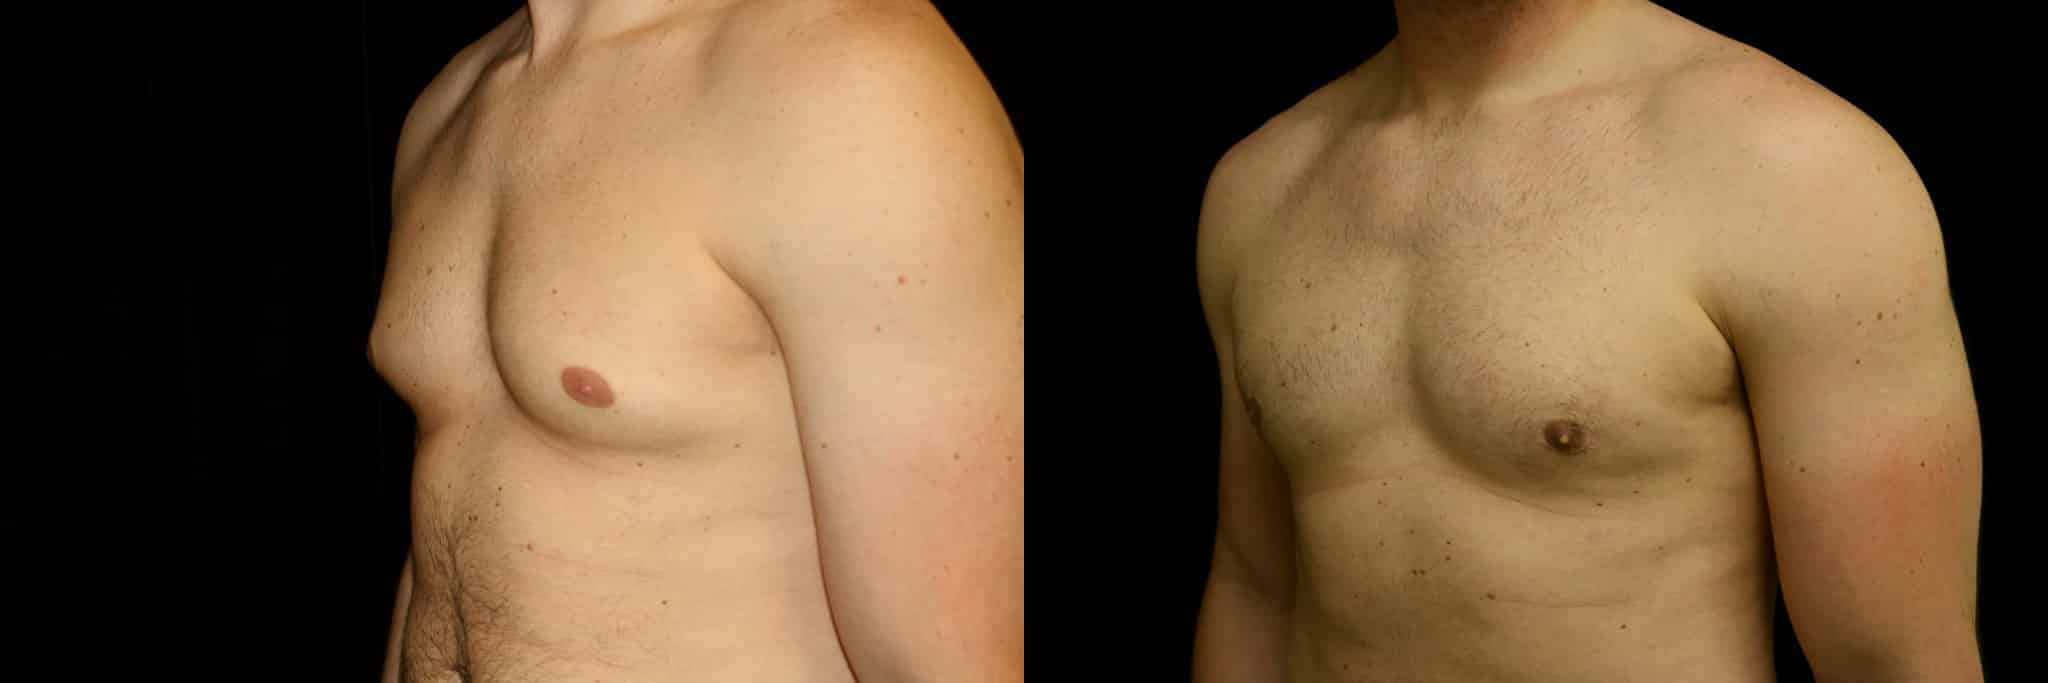 Gynecomastia Patient 8 Before & After Details